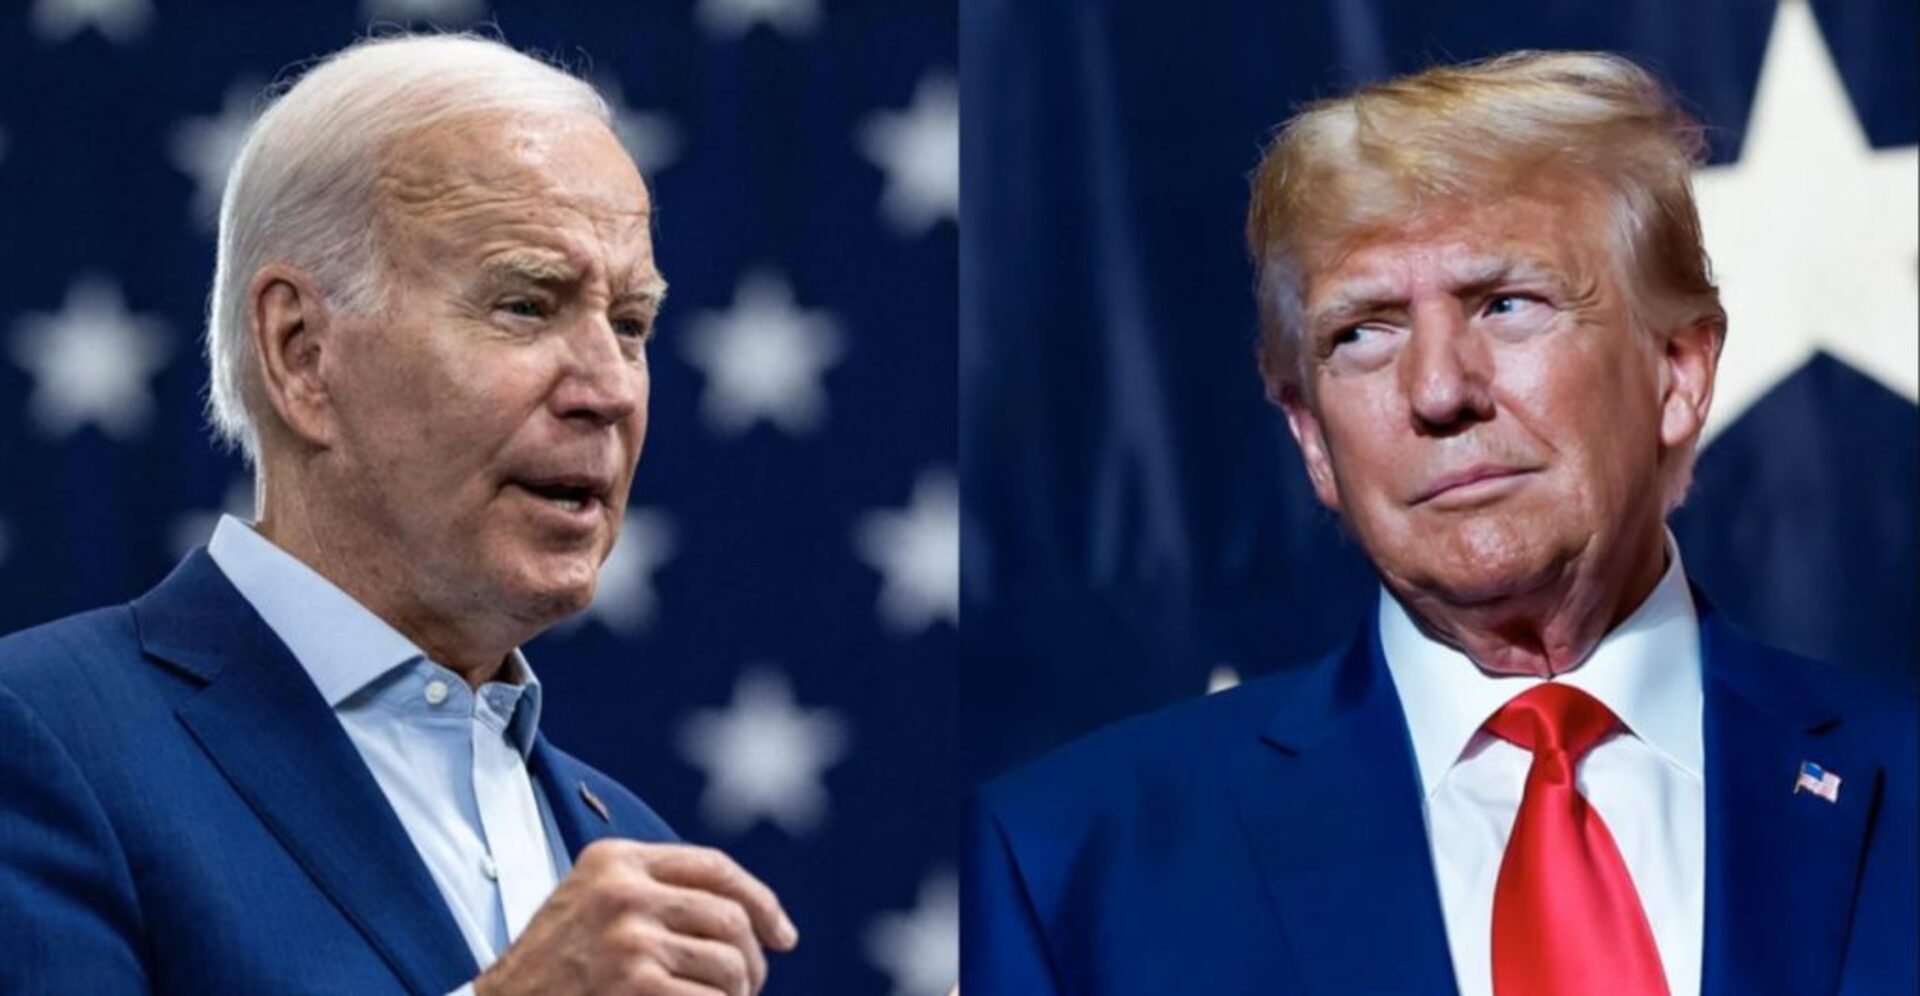 Where do Biden and Trump stand on abortion?